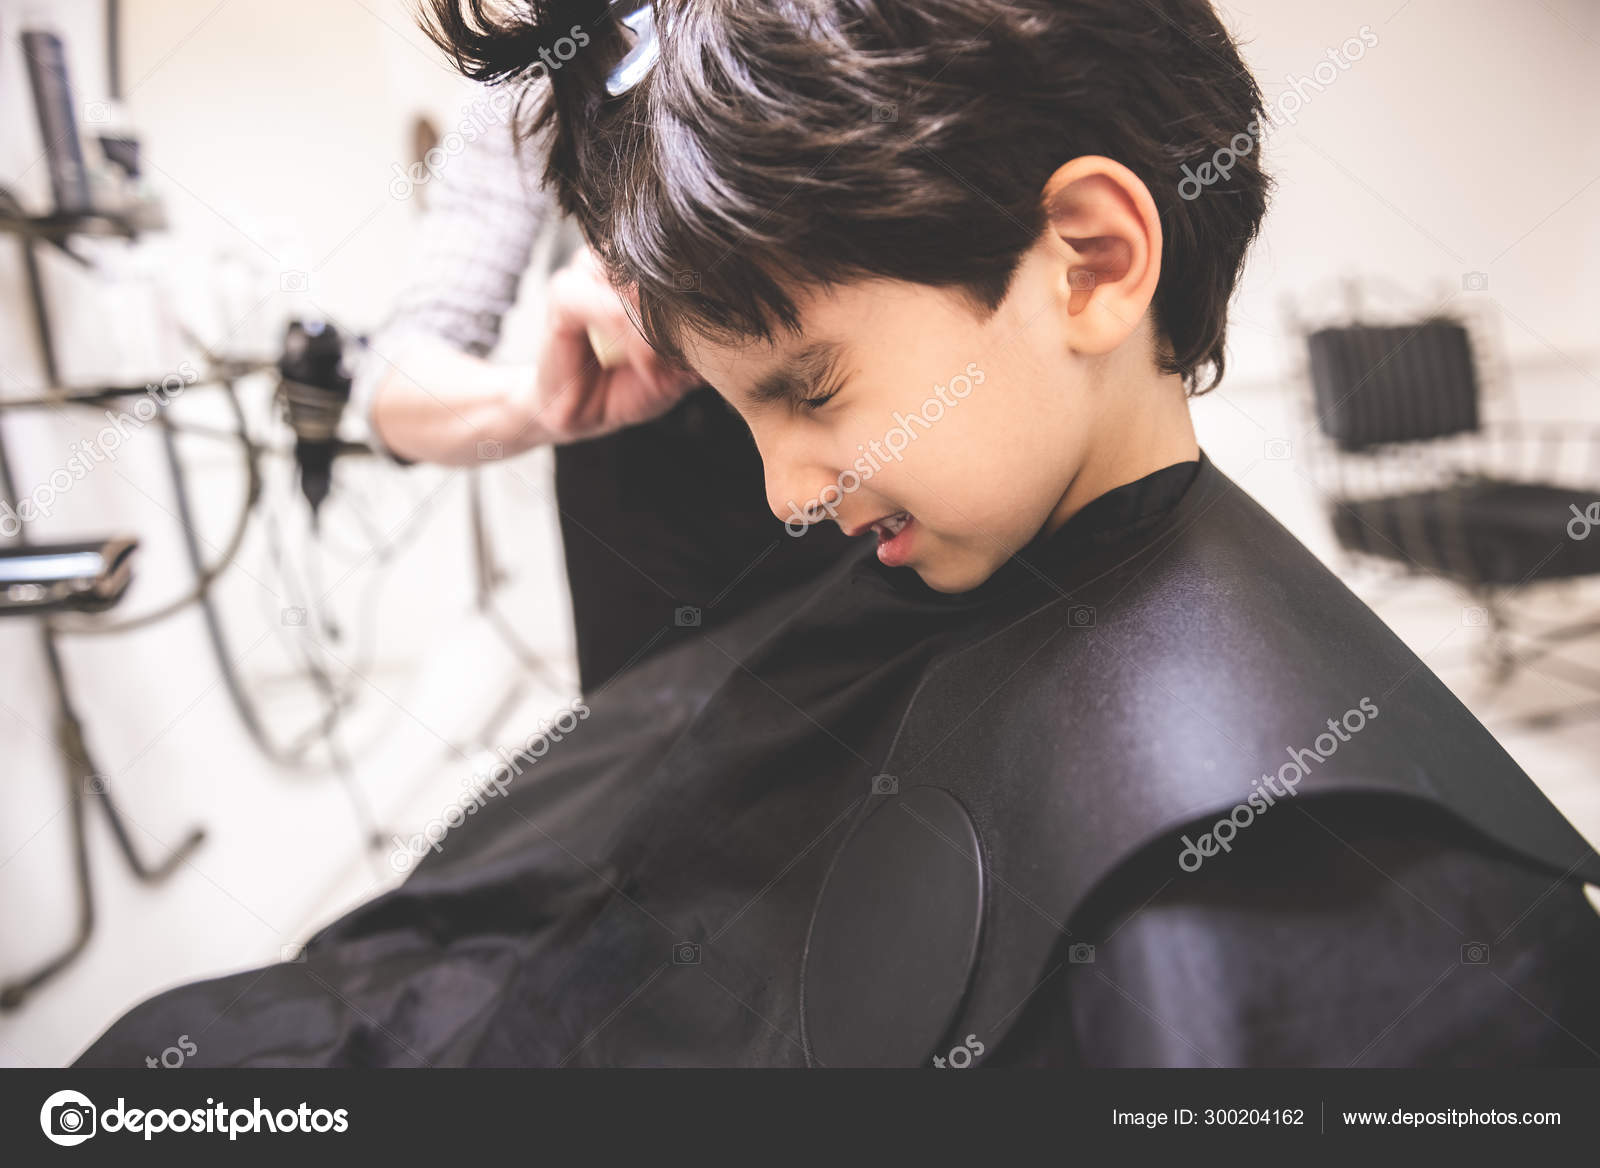 I don't like hair cut it hurts me little young child boy toddler at  barbershop